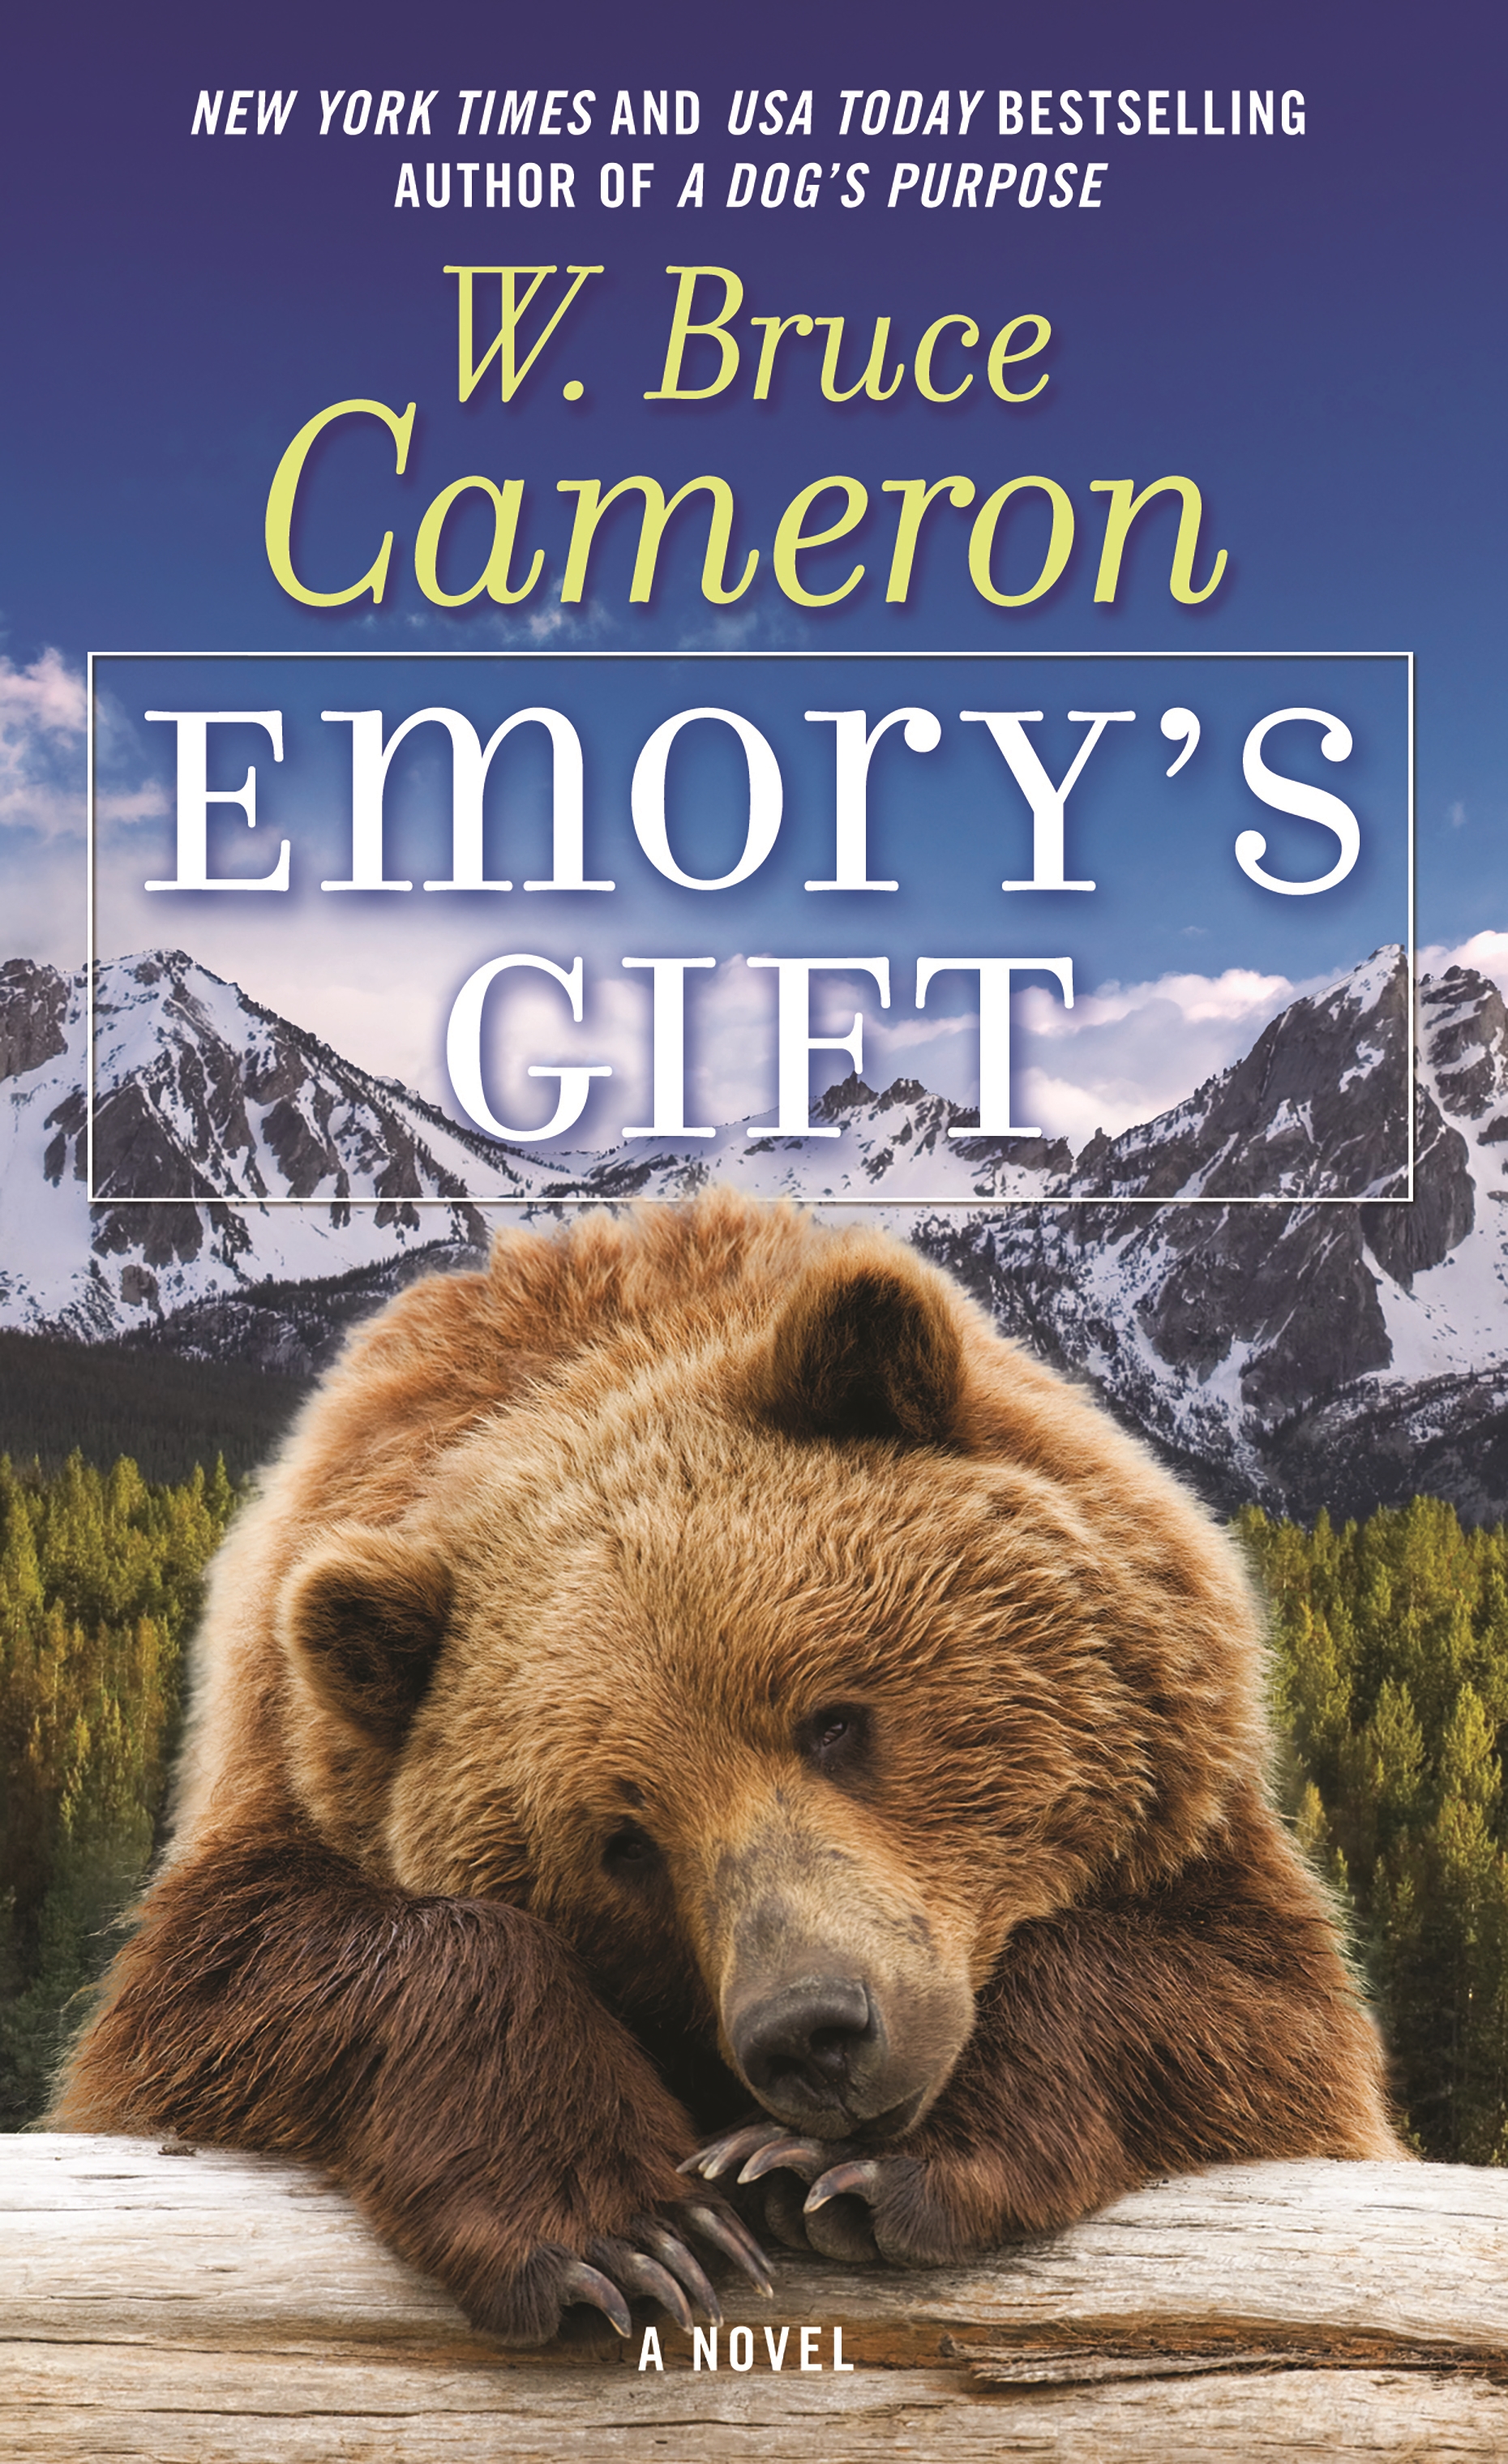 Emory's Gift : A Novel by W. Bruce Cameron